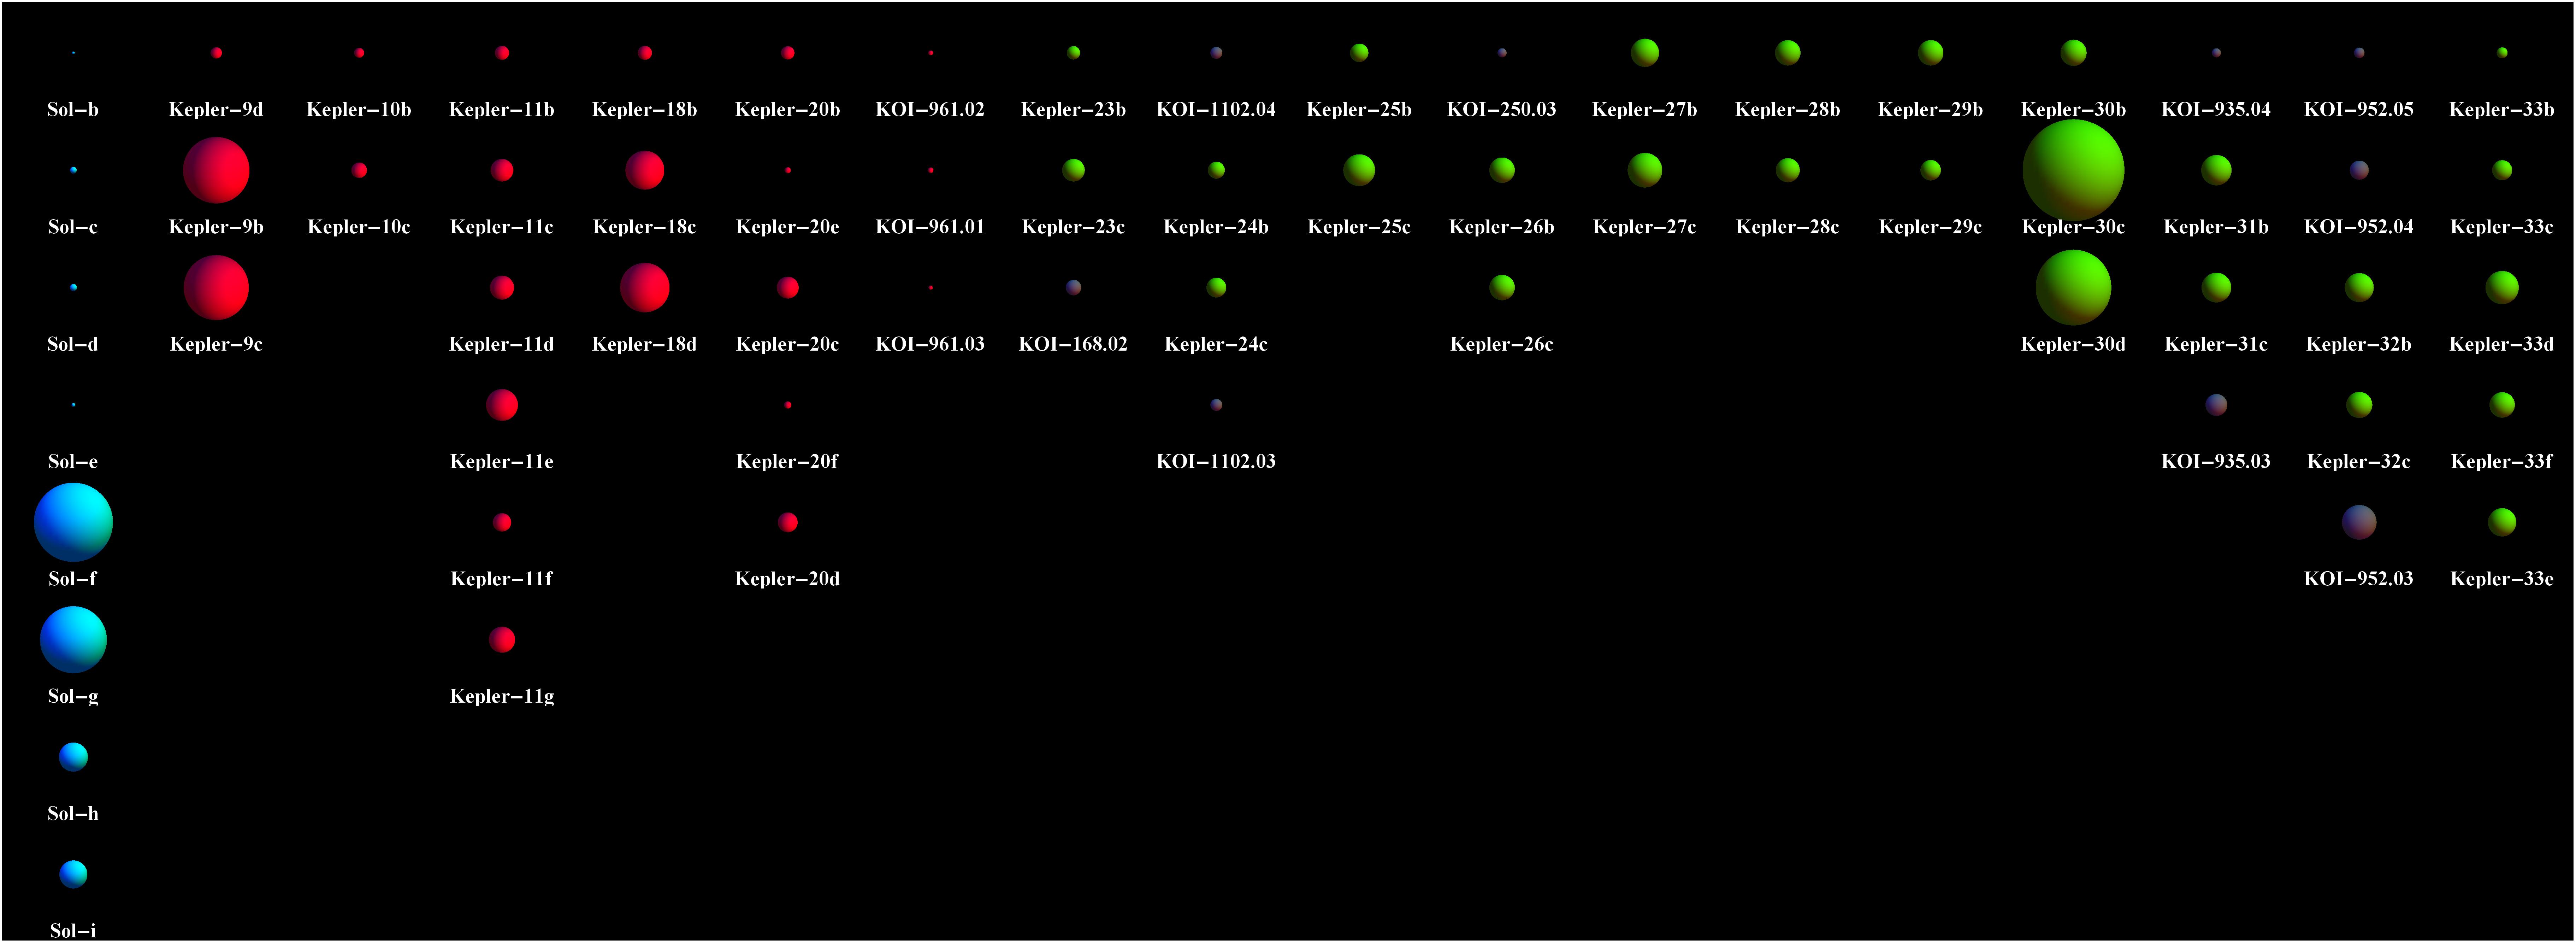 Kepler has uncovered 26 new planets (green)